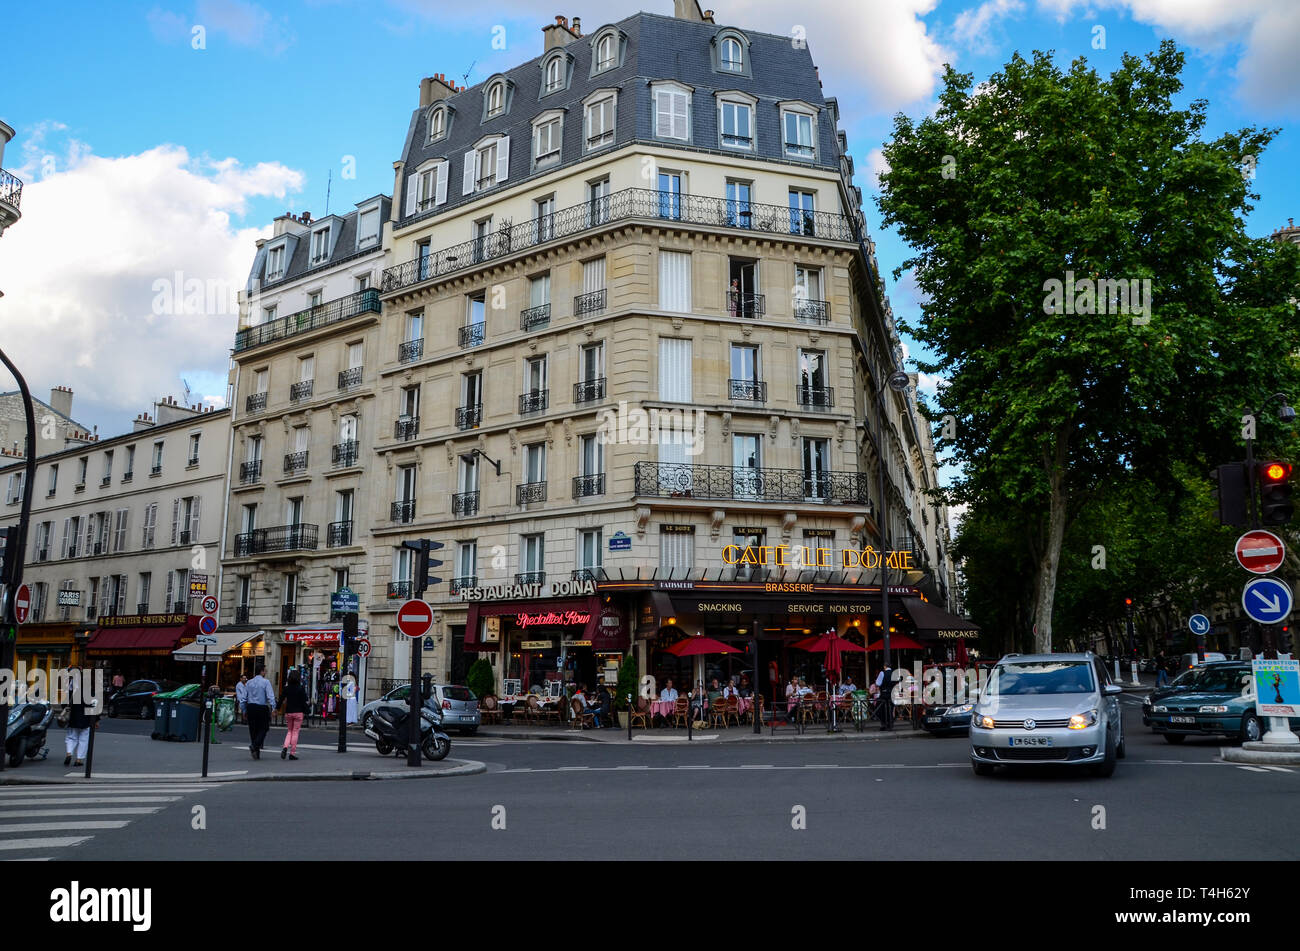 Cafe le Dome, Paris, France. Customers dining outside, eating al fresco in evening, dusk. Restaurant Doina. Pavement. People and traffic Stock Photo